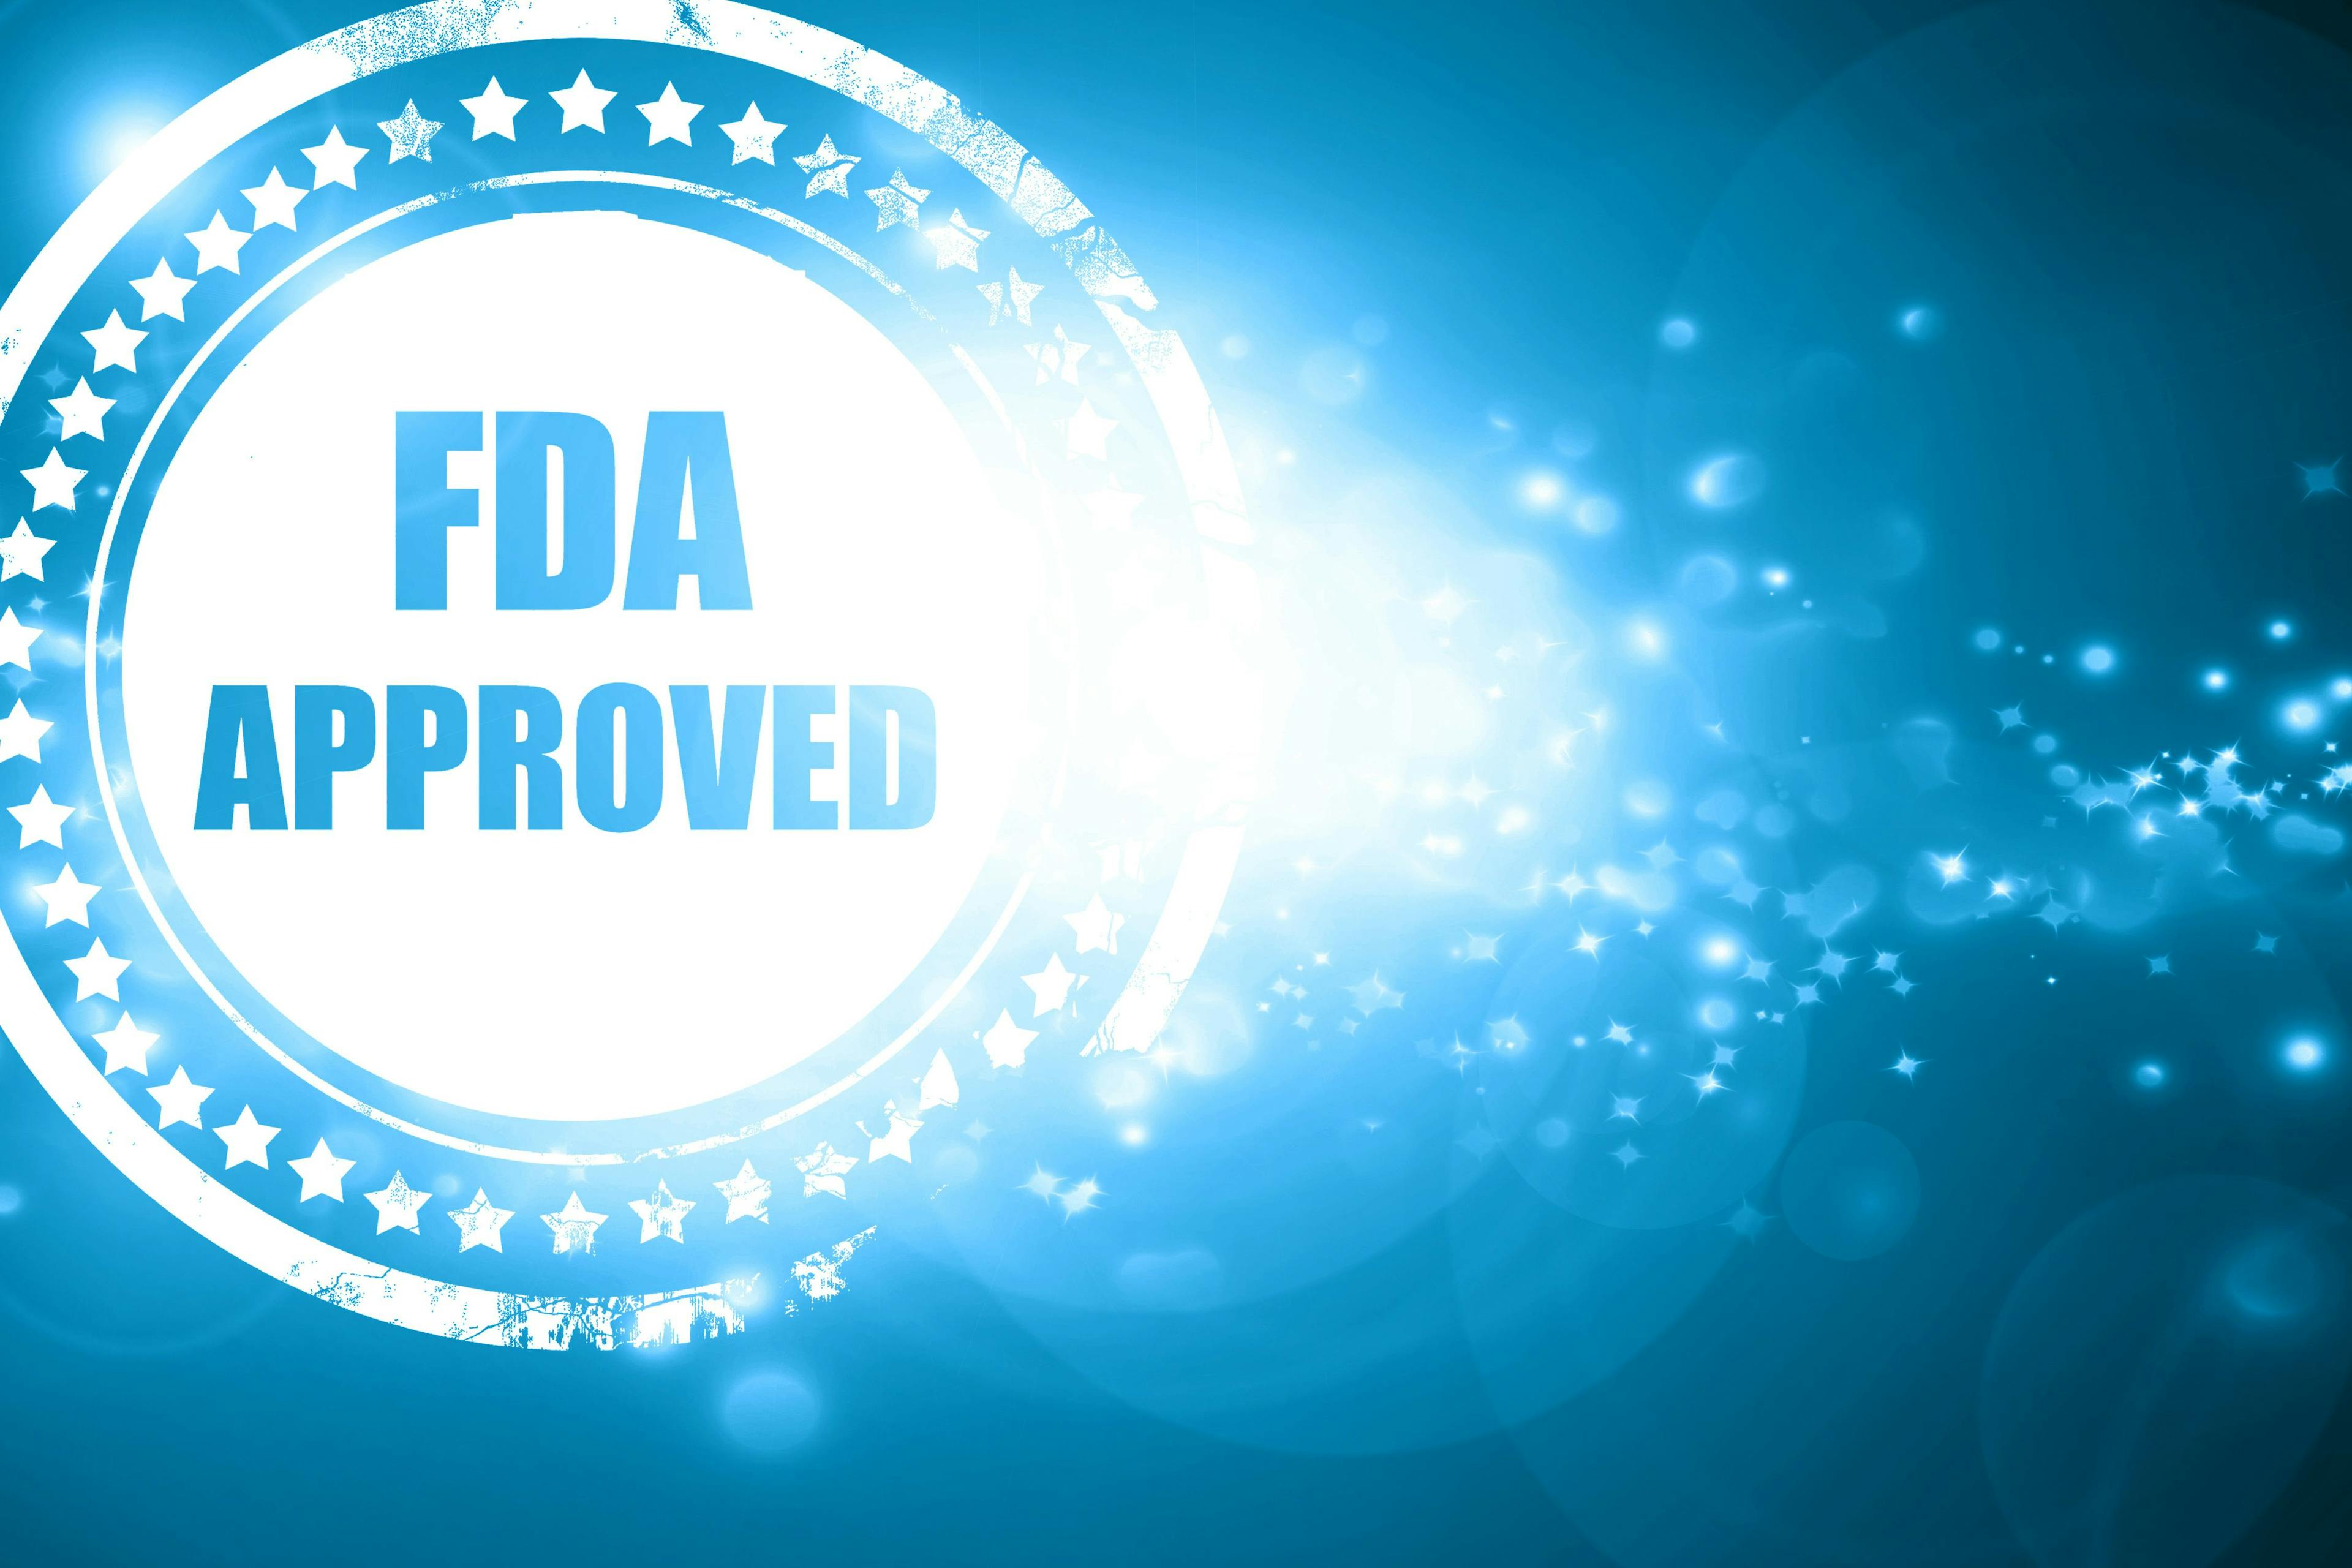 Announcement follows the FDA’s accelerated approval and unanimous endorsement of the drug earlier this year.